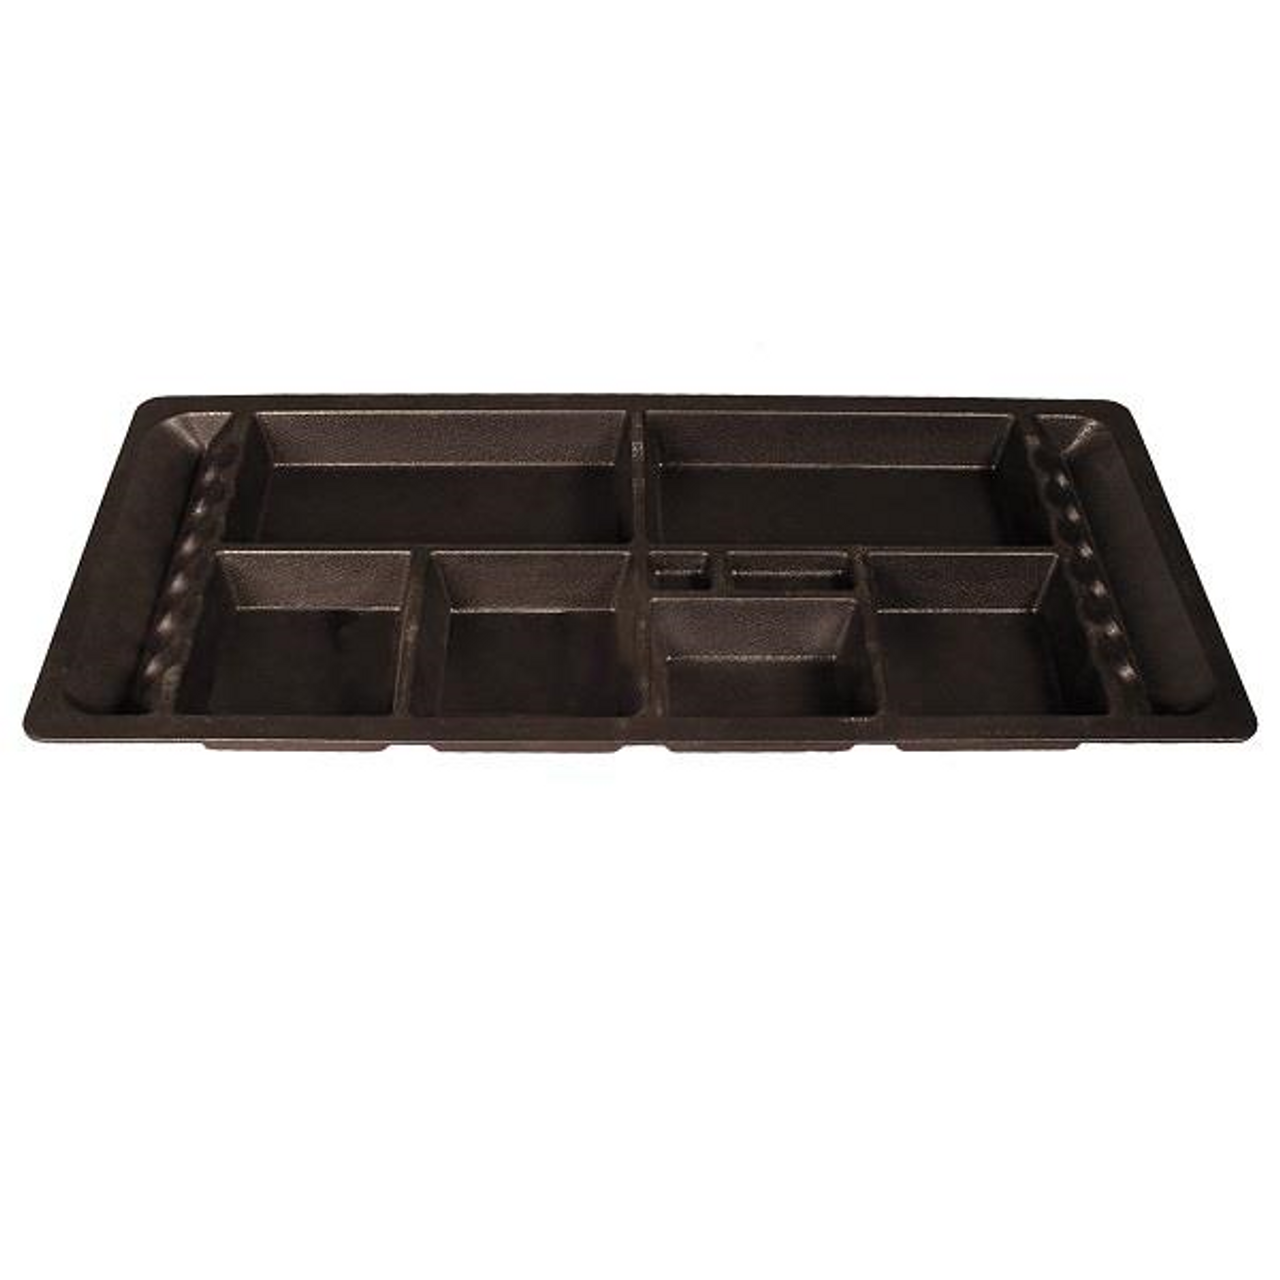 E-Z-GO TXT 2010-Compartment Underseat Tray (Years 1994-2013), 20106